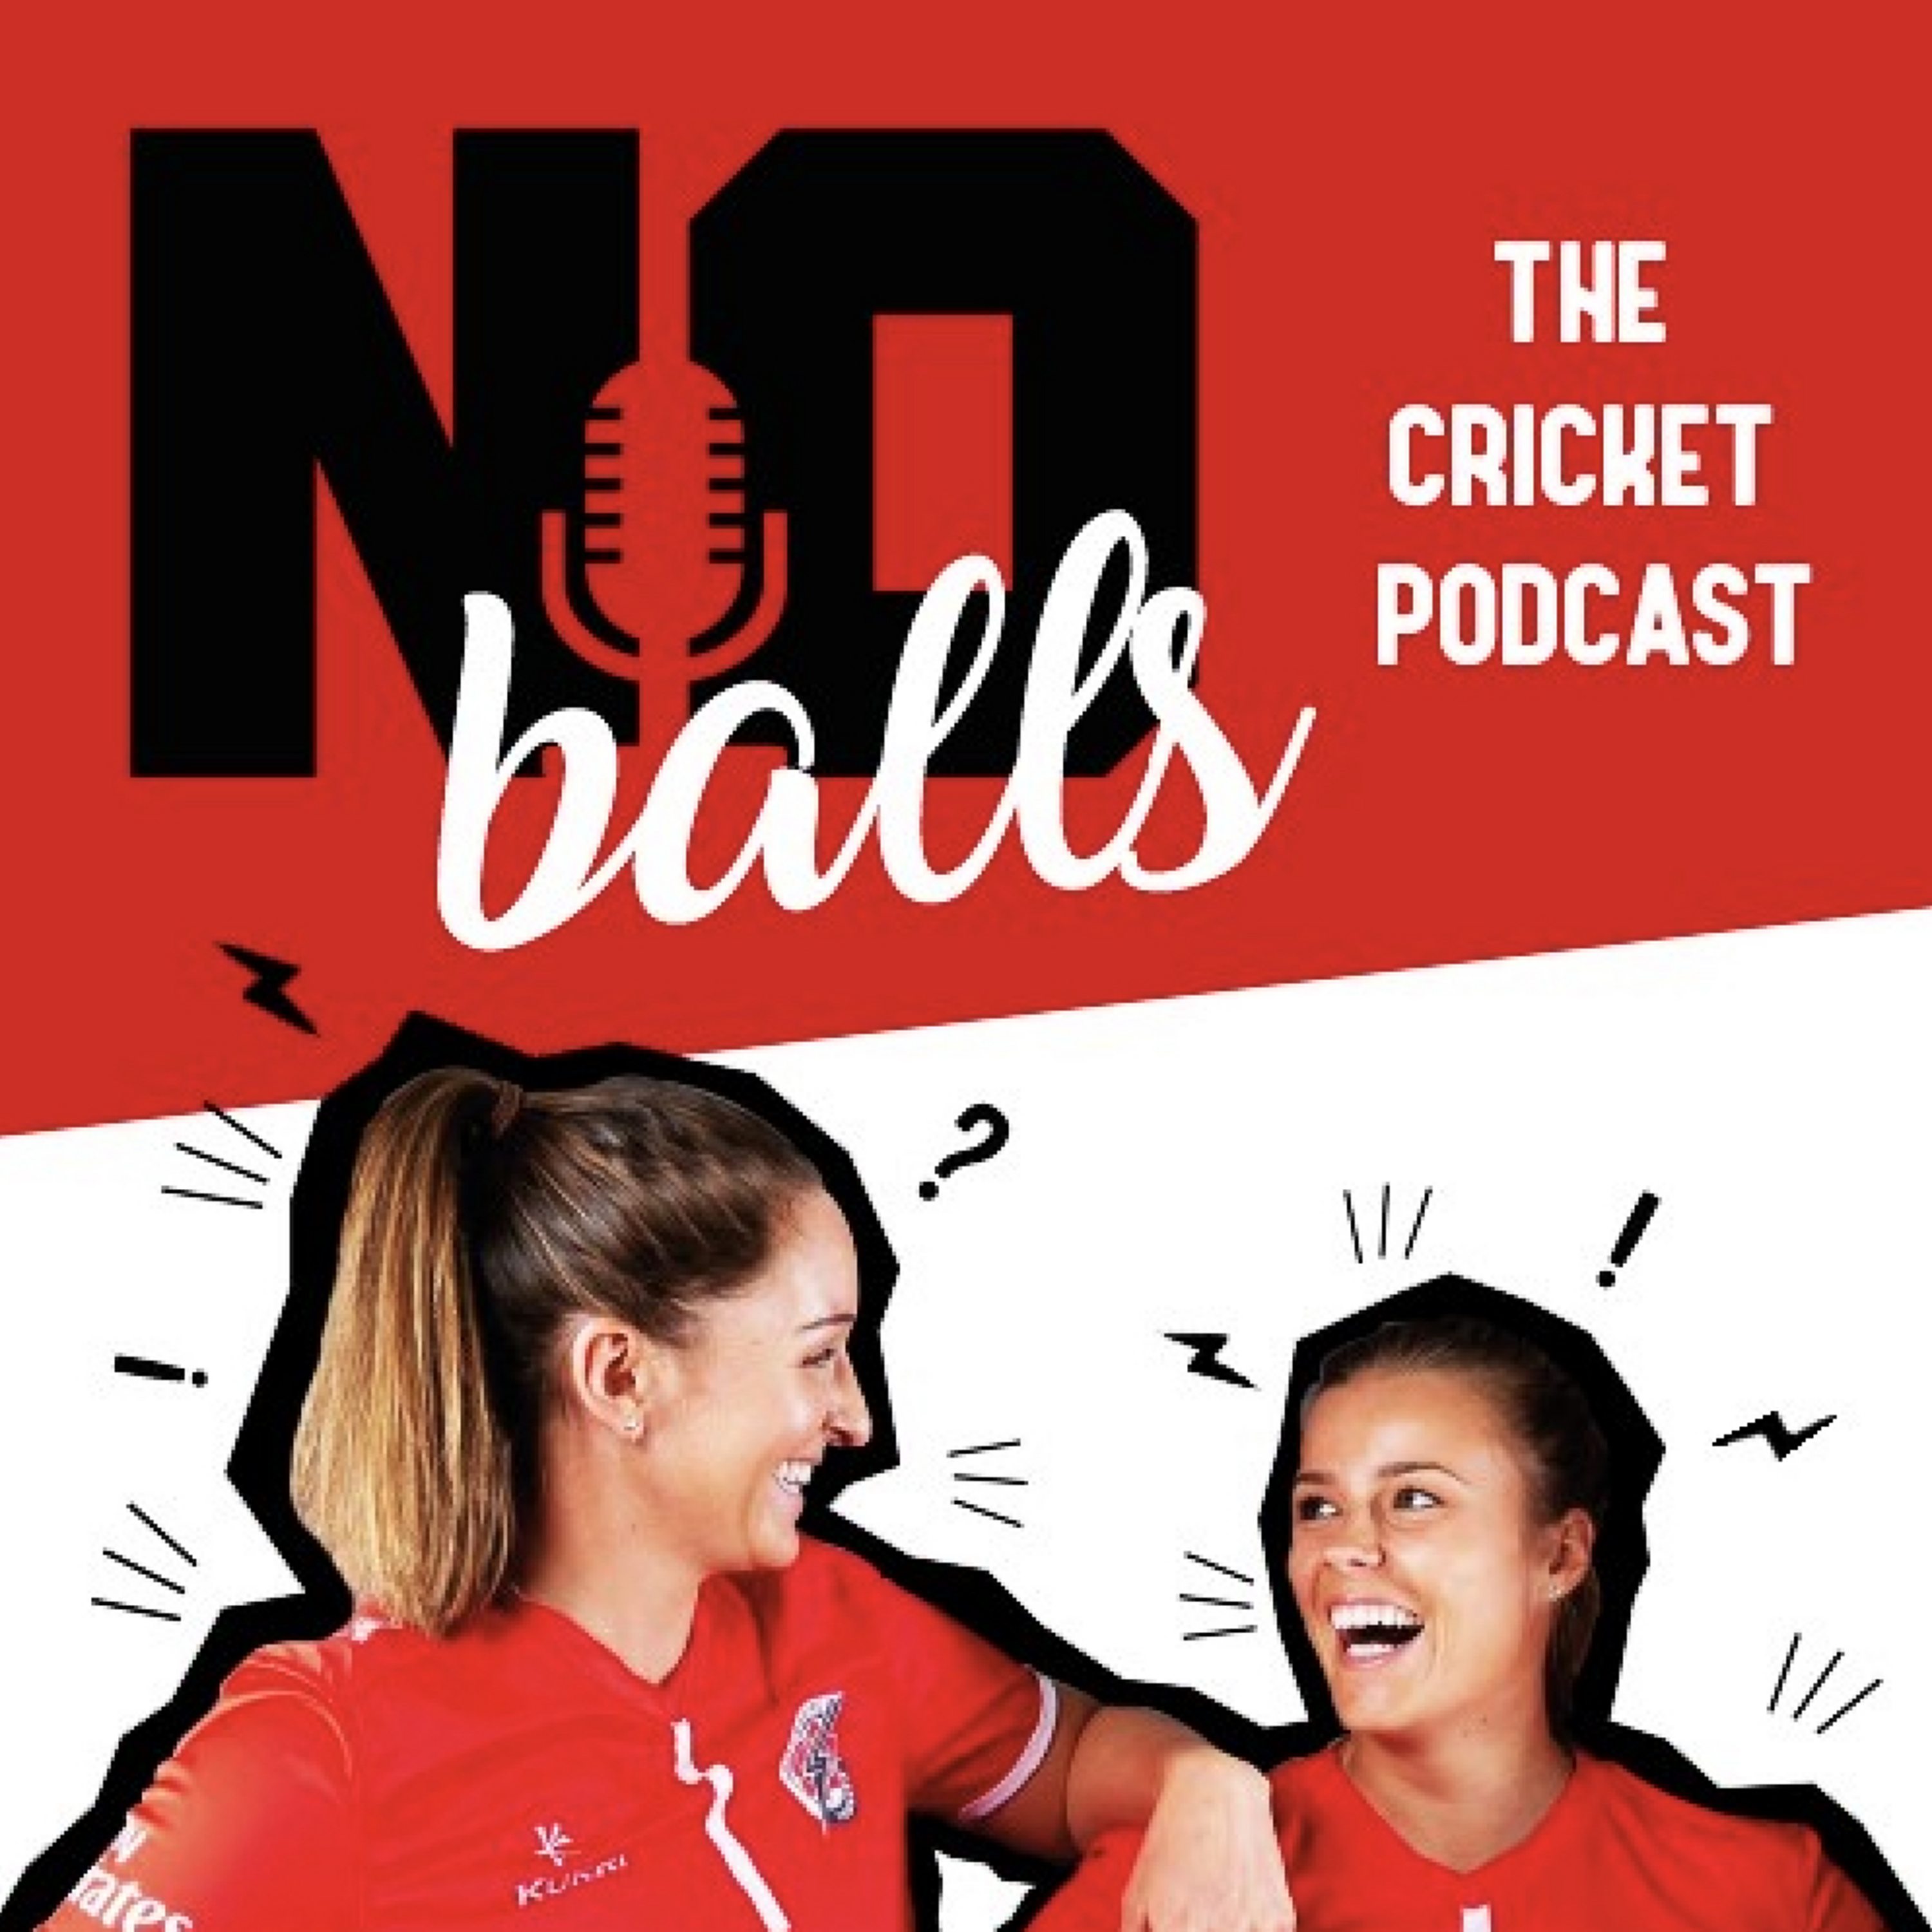 No Balls: The Cricket Podcast - You’ve always got us...